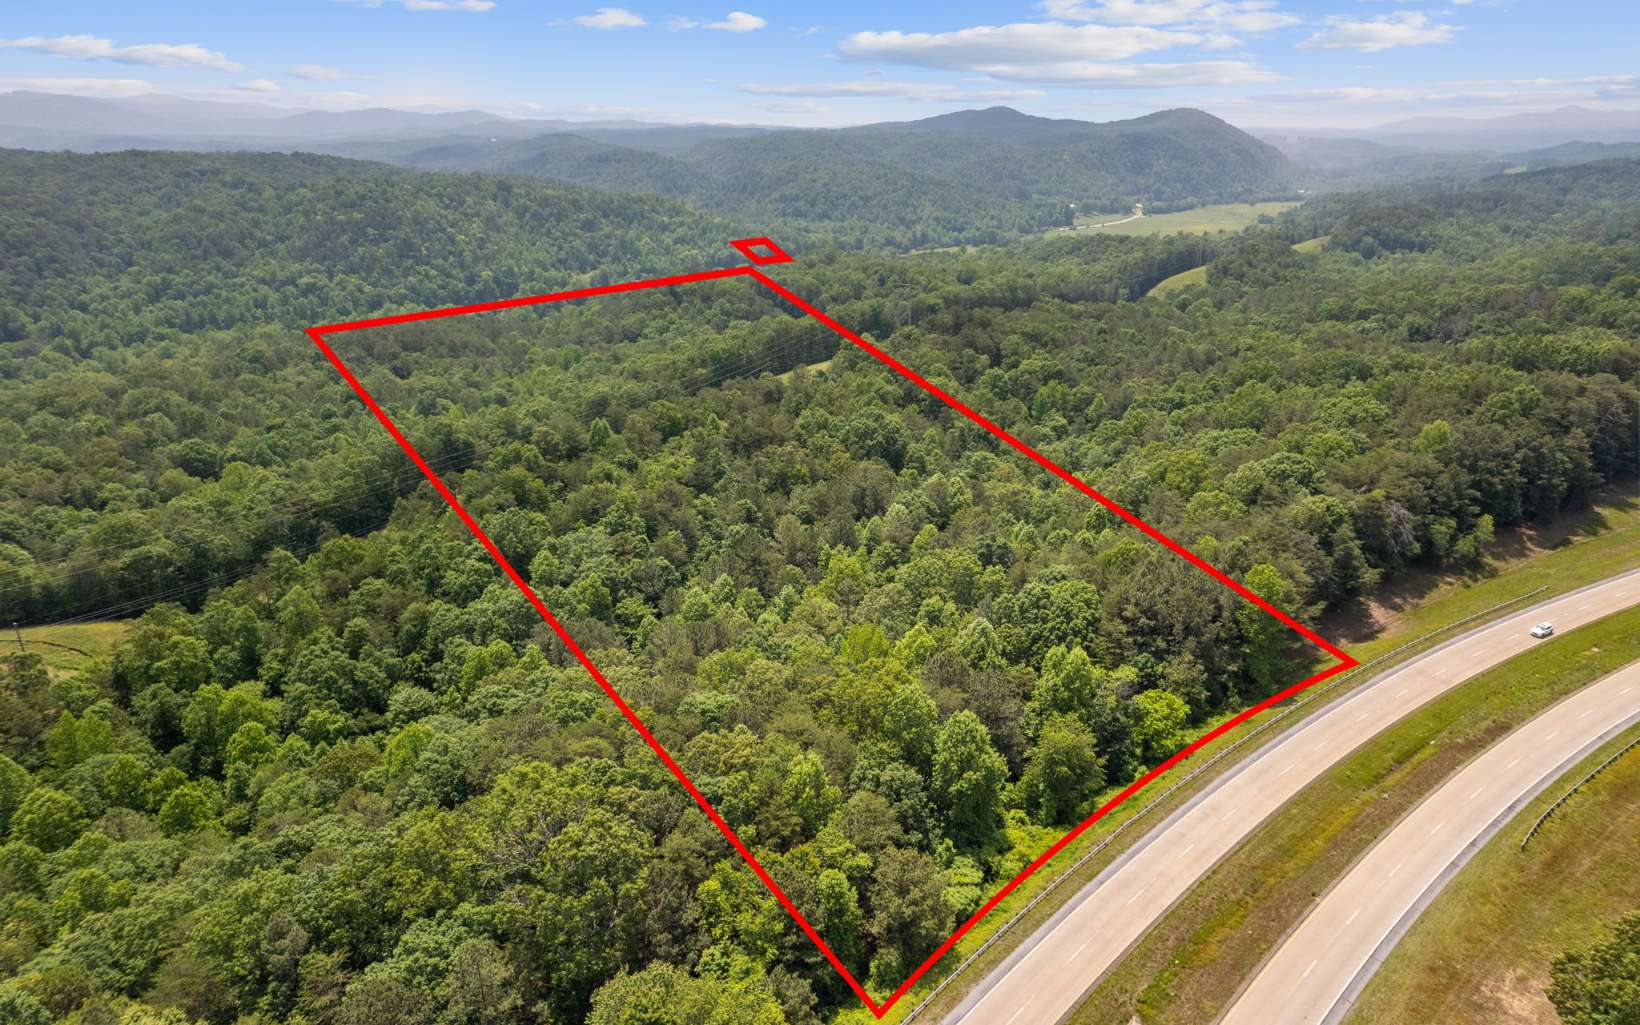 LOOKING for an exceptional estate sale opportunity in Talking Rock, Georgia?! This stunning property offers a generous 18.22 acres of land, presenting a unique chance to own a piece of this beautiful small town. Boasting frontage along Hwy 515, this parcel provides excellent visibility and convenient access.Nestled within the picturesque countryside, this tract of land offers breathtaking views of the surrounding mountains and a scenic creek, adding to its natural allure. The rolling and steep topography adds character and charm to the landscape, making it a truly captivating location. As an added benefit, an adjoining 18.14-acre parcel is also available for sale, presenting an incredible opportunity to expand your ownership to a potential 36+ acres. This opens up endless possibilities for development, investment, or personal use. Come take a look today!